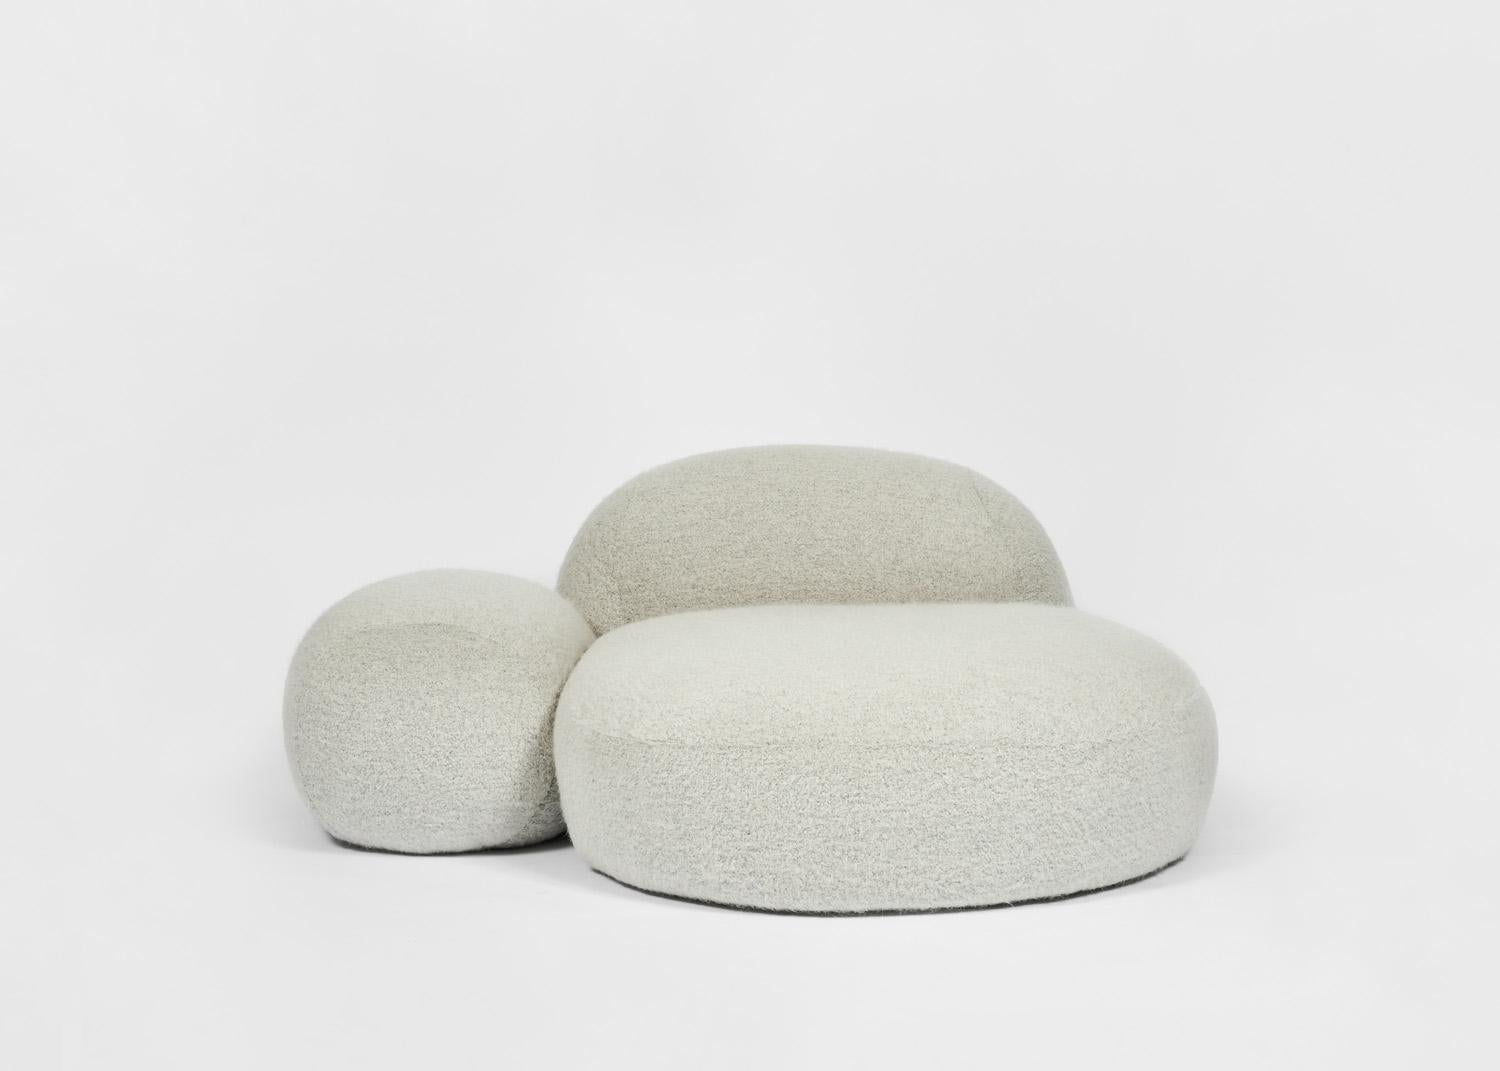 The Rock Sofa by FRED RIGBY as part of the 5/5/5 Collection. An assemblage of 5 objects by 5 designers, celebrating 5 years of St. Vincents.

With complete freedom and over a year in the making, the result is an original and inspiring assemblage of